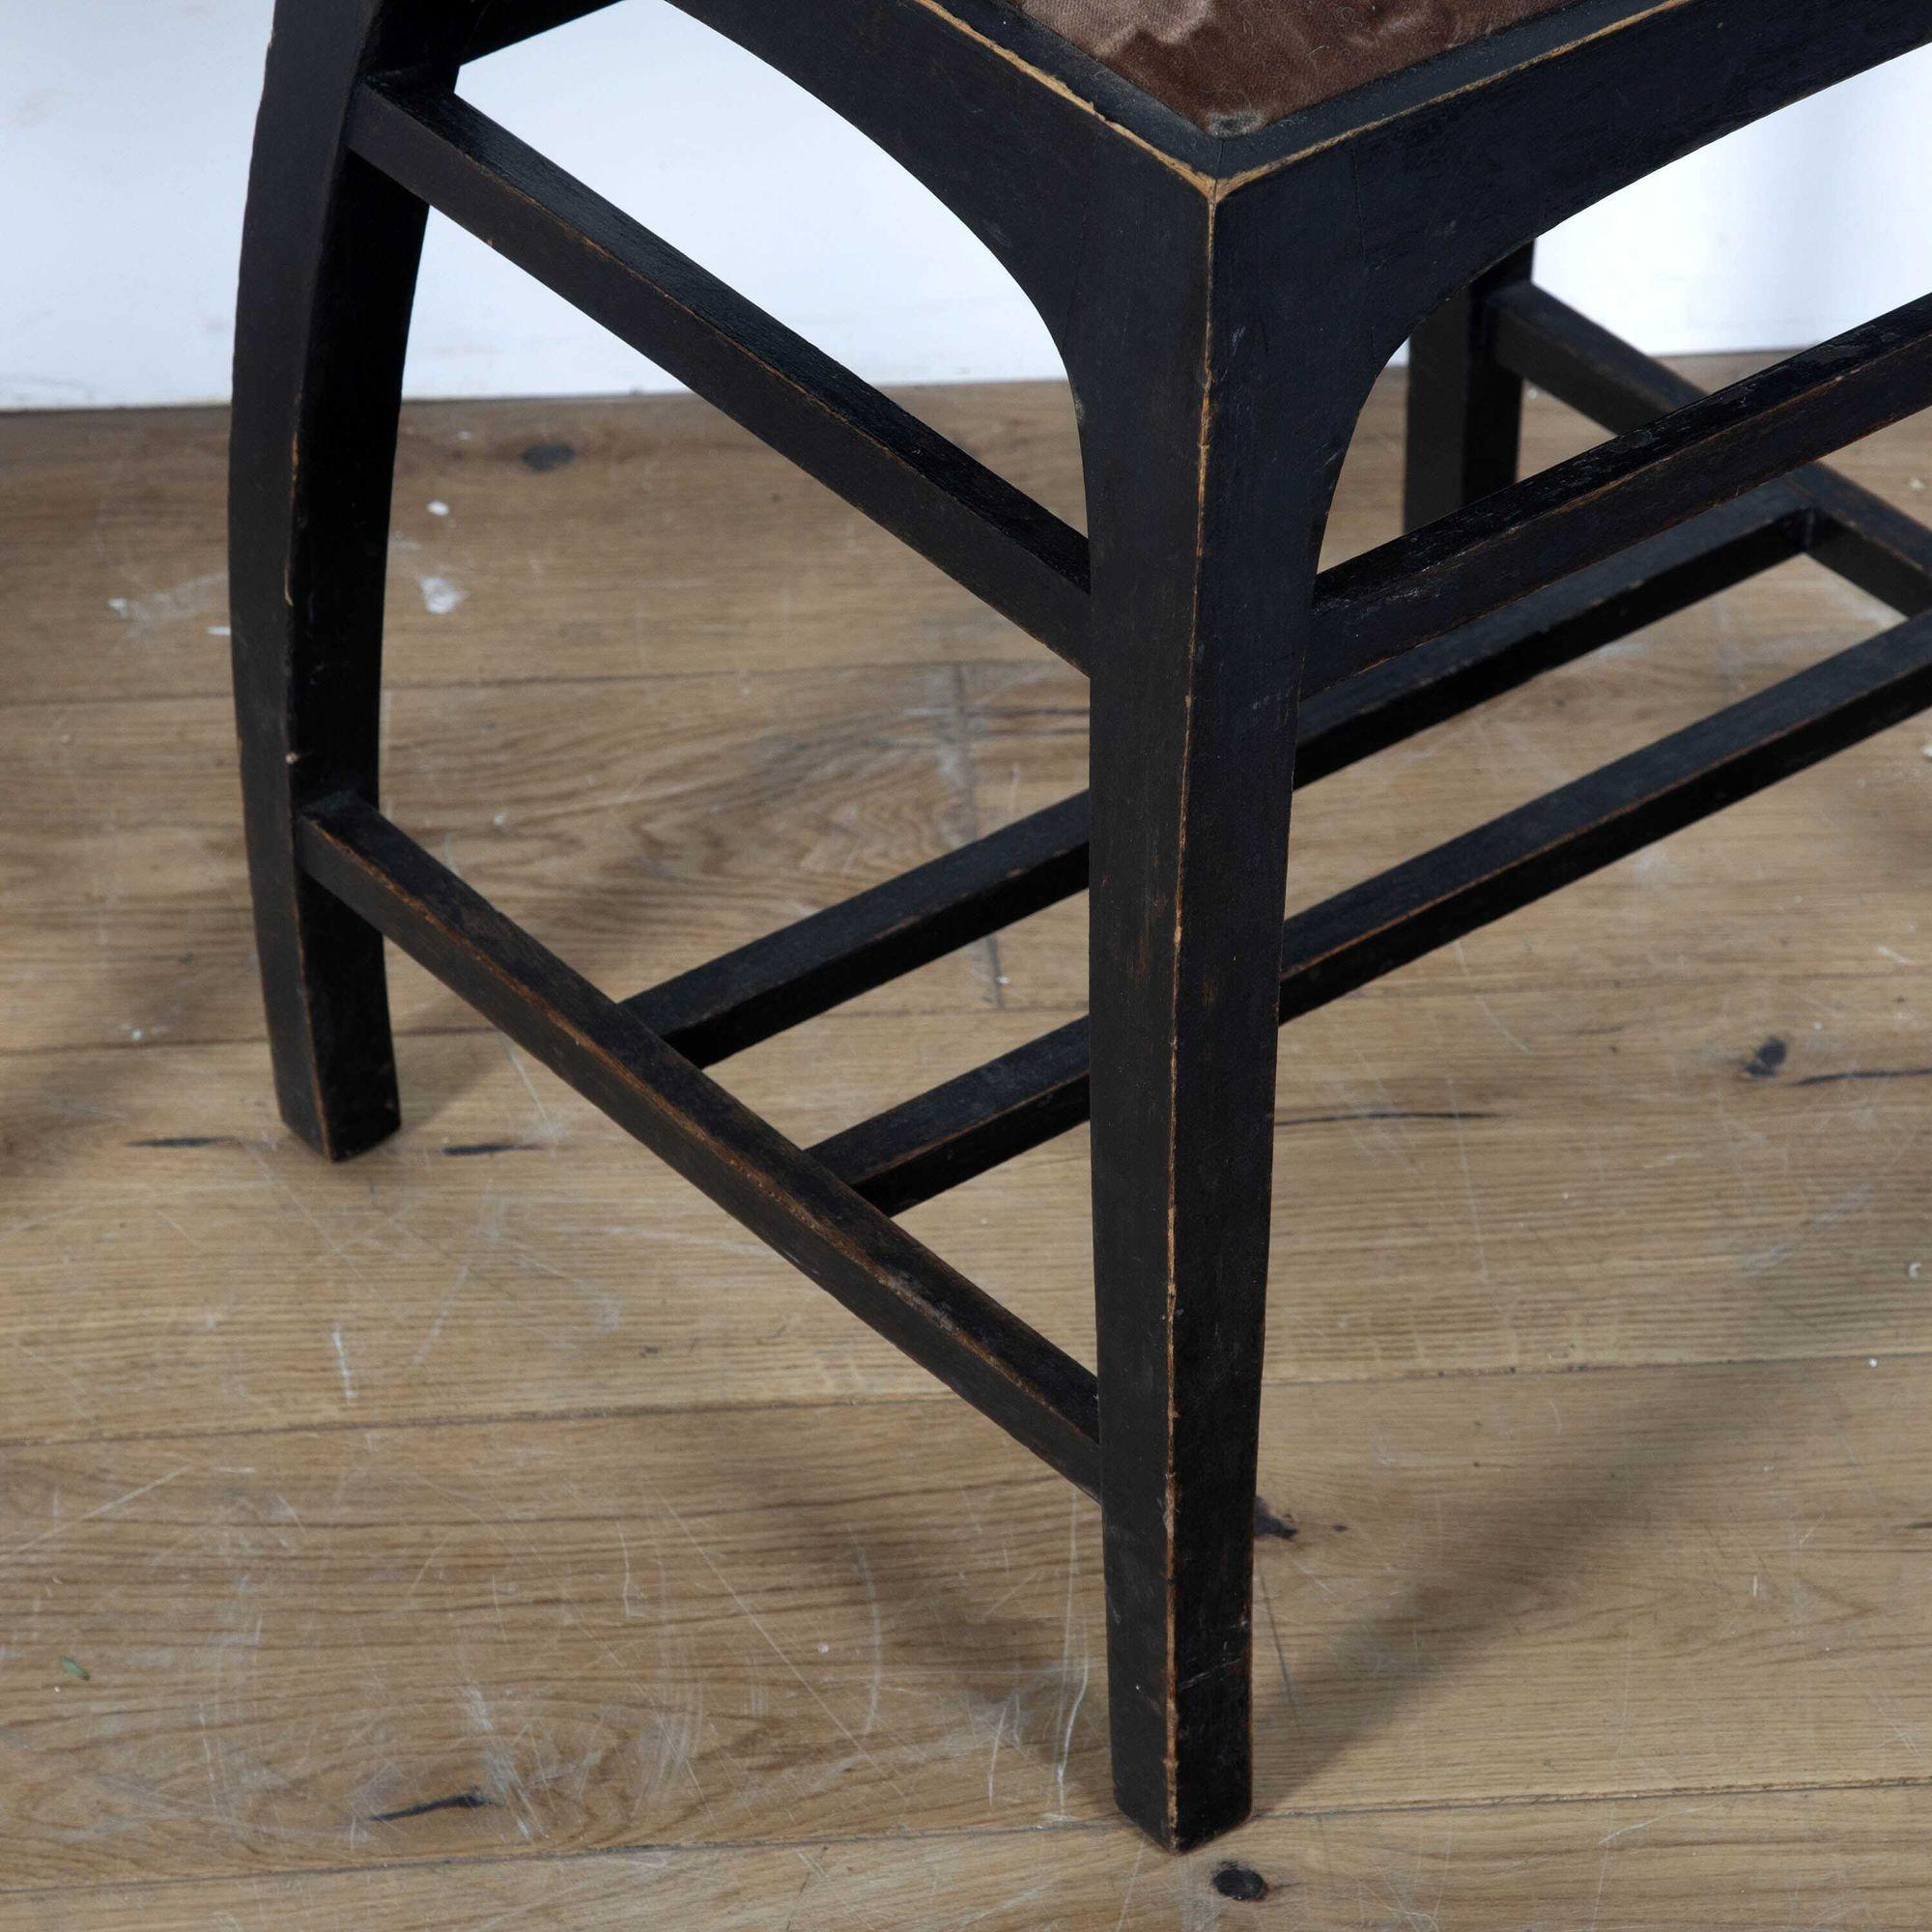 Pair of ebonised stools attributed to Koloman Moser.
Koloman Moser (1868-1918) was one of the foremost artists of the Vienna Secession movement, founded in 1897, and the following Wiener Werkstatte in 1903.
Both movements were close in ideals to